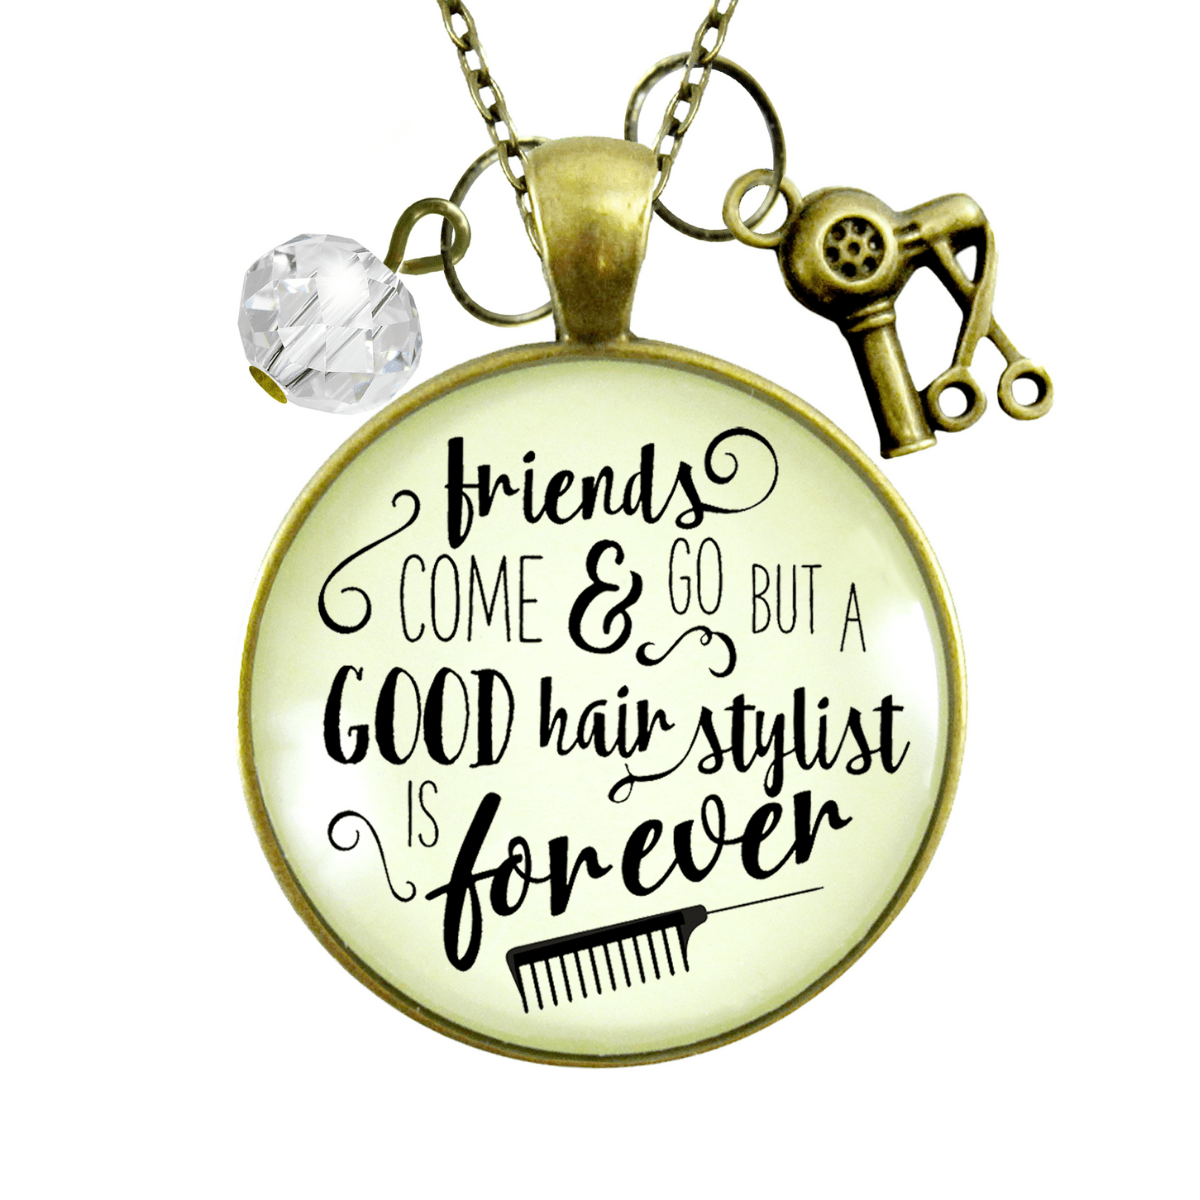 Gutsy Goodness Hair Stylist Necklace Friends Forever Beautician Quote Jewelry - Gutsy Goodness Handmade Jewelry;Hair Stylist Necklace Friends Forever Beautician Quote Jewelry - Gutsy Goodness Handmade Jewelry Gifts